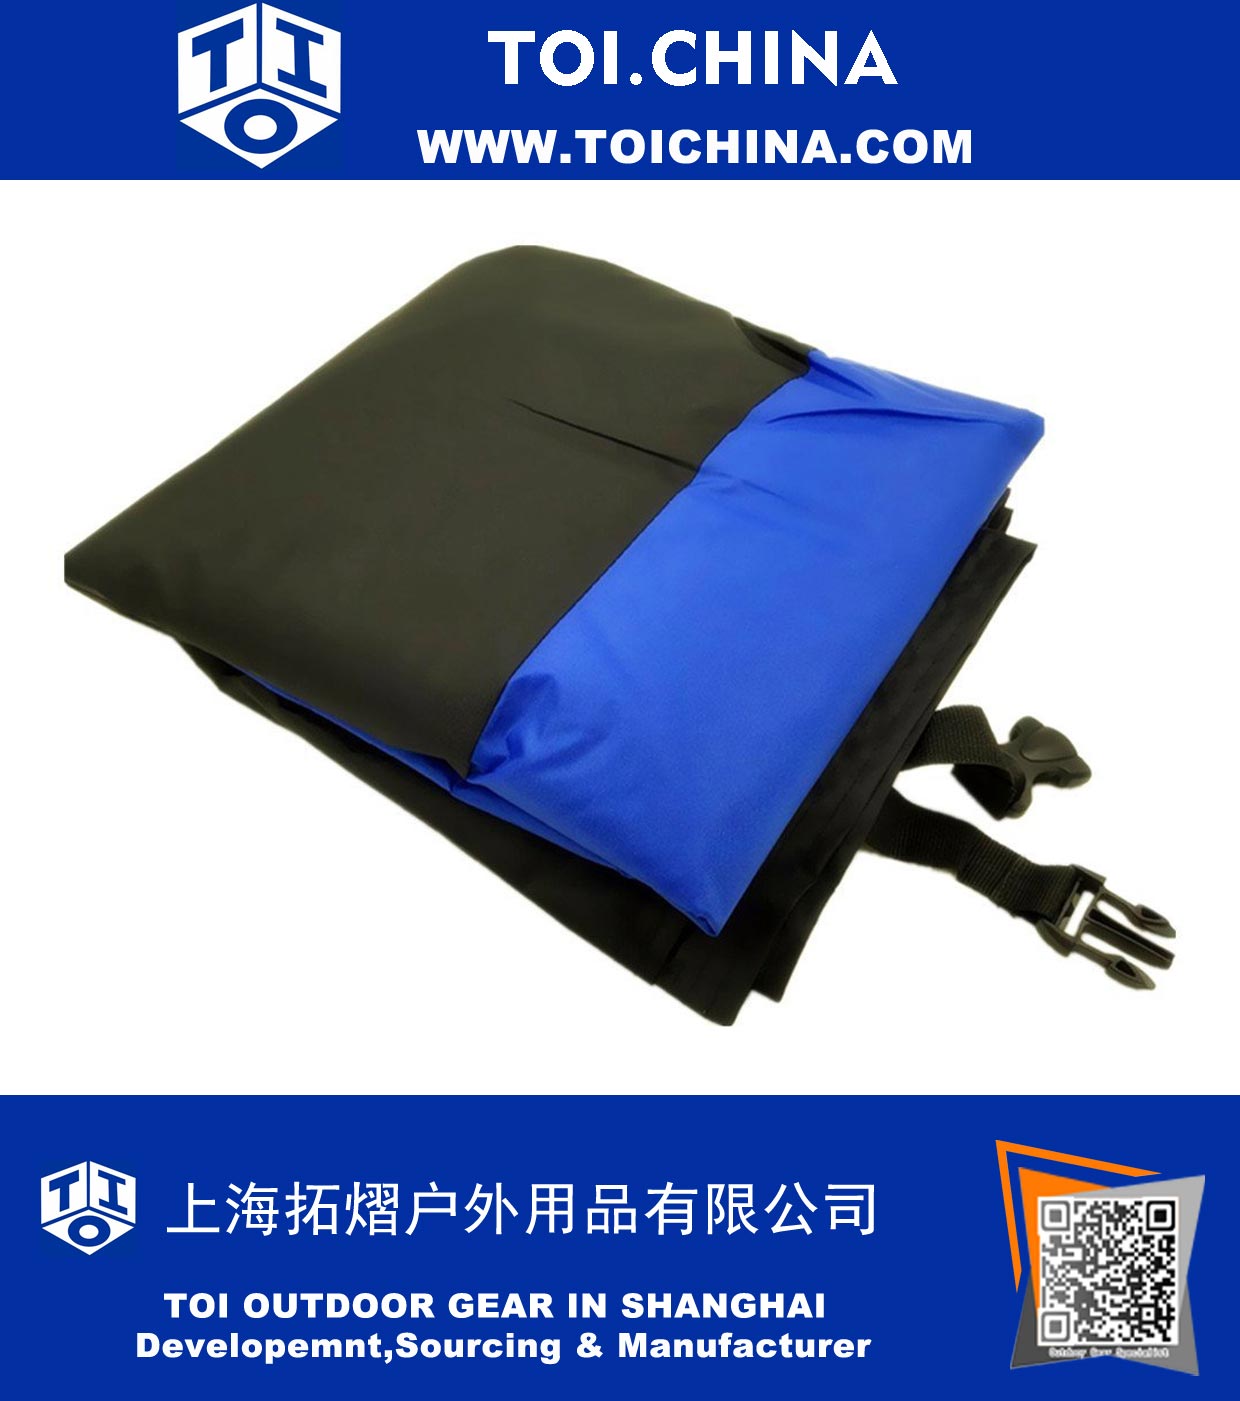 Universal Motorcycle Cover